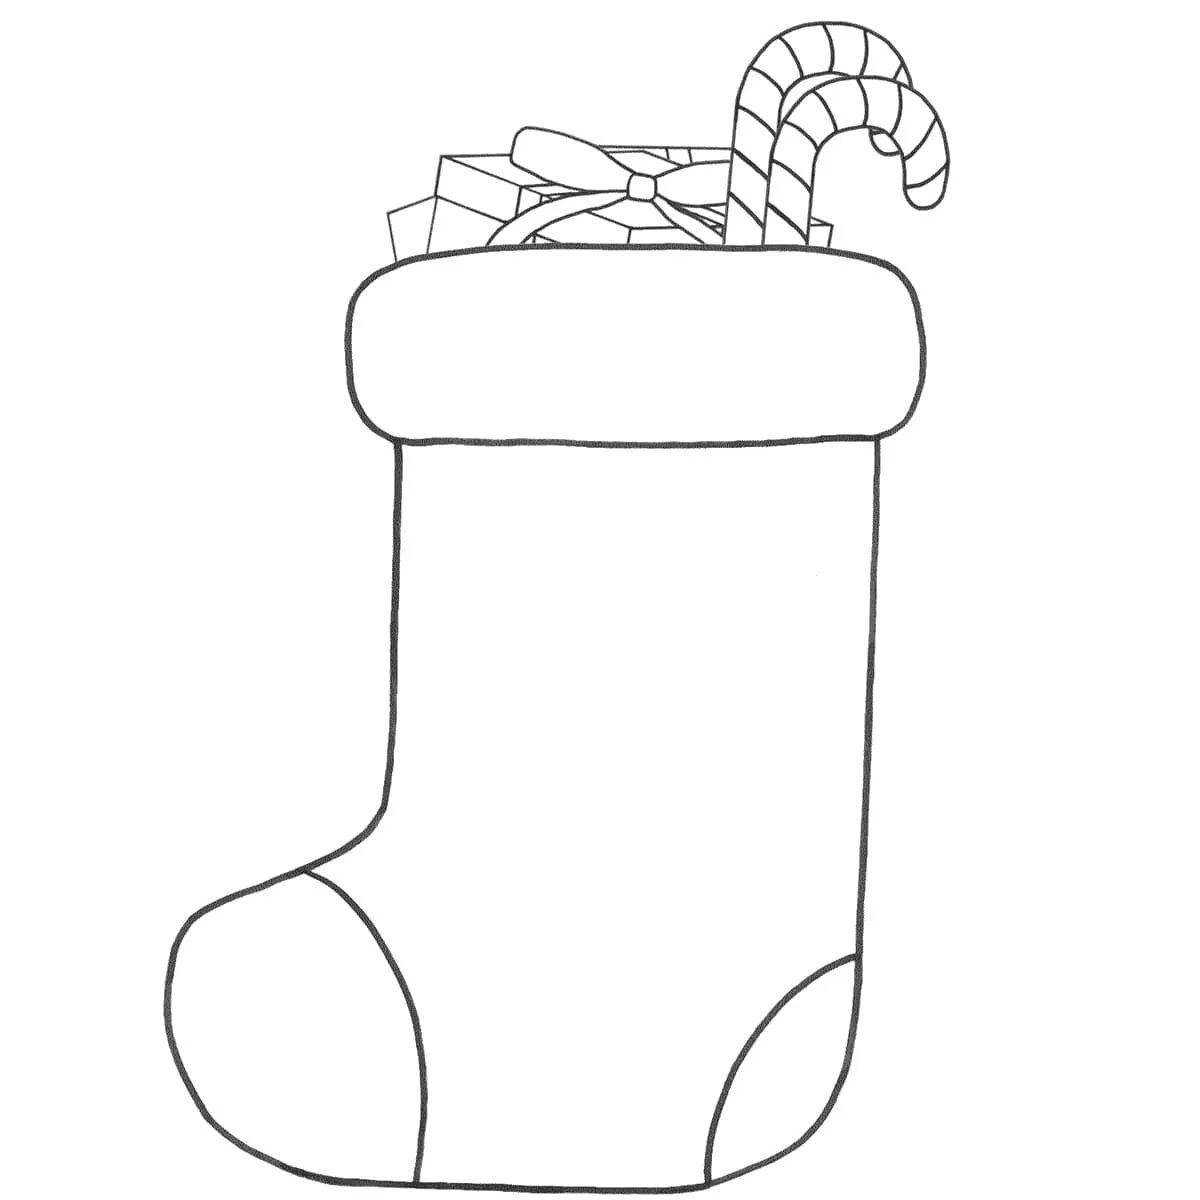 Live New Year's boot coloring